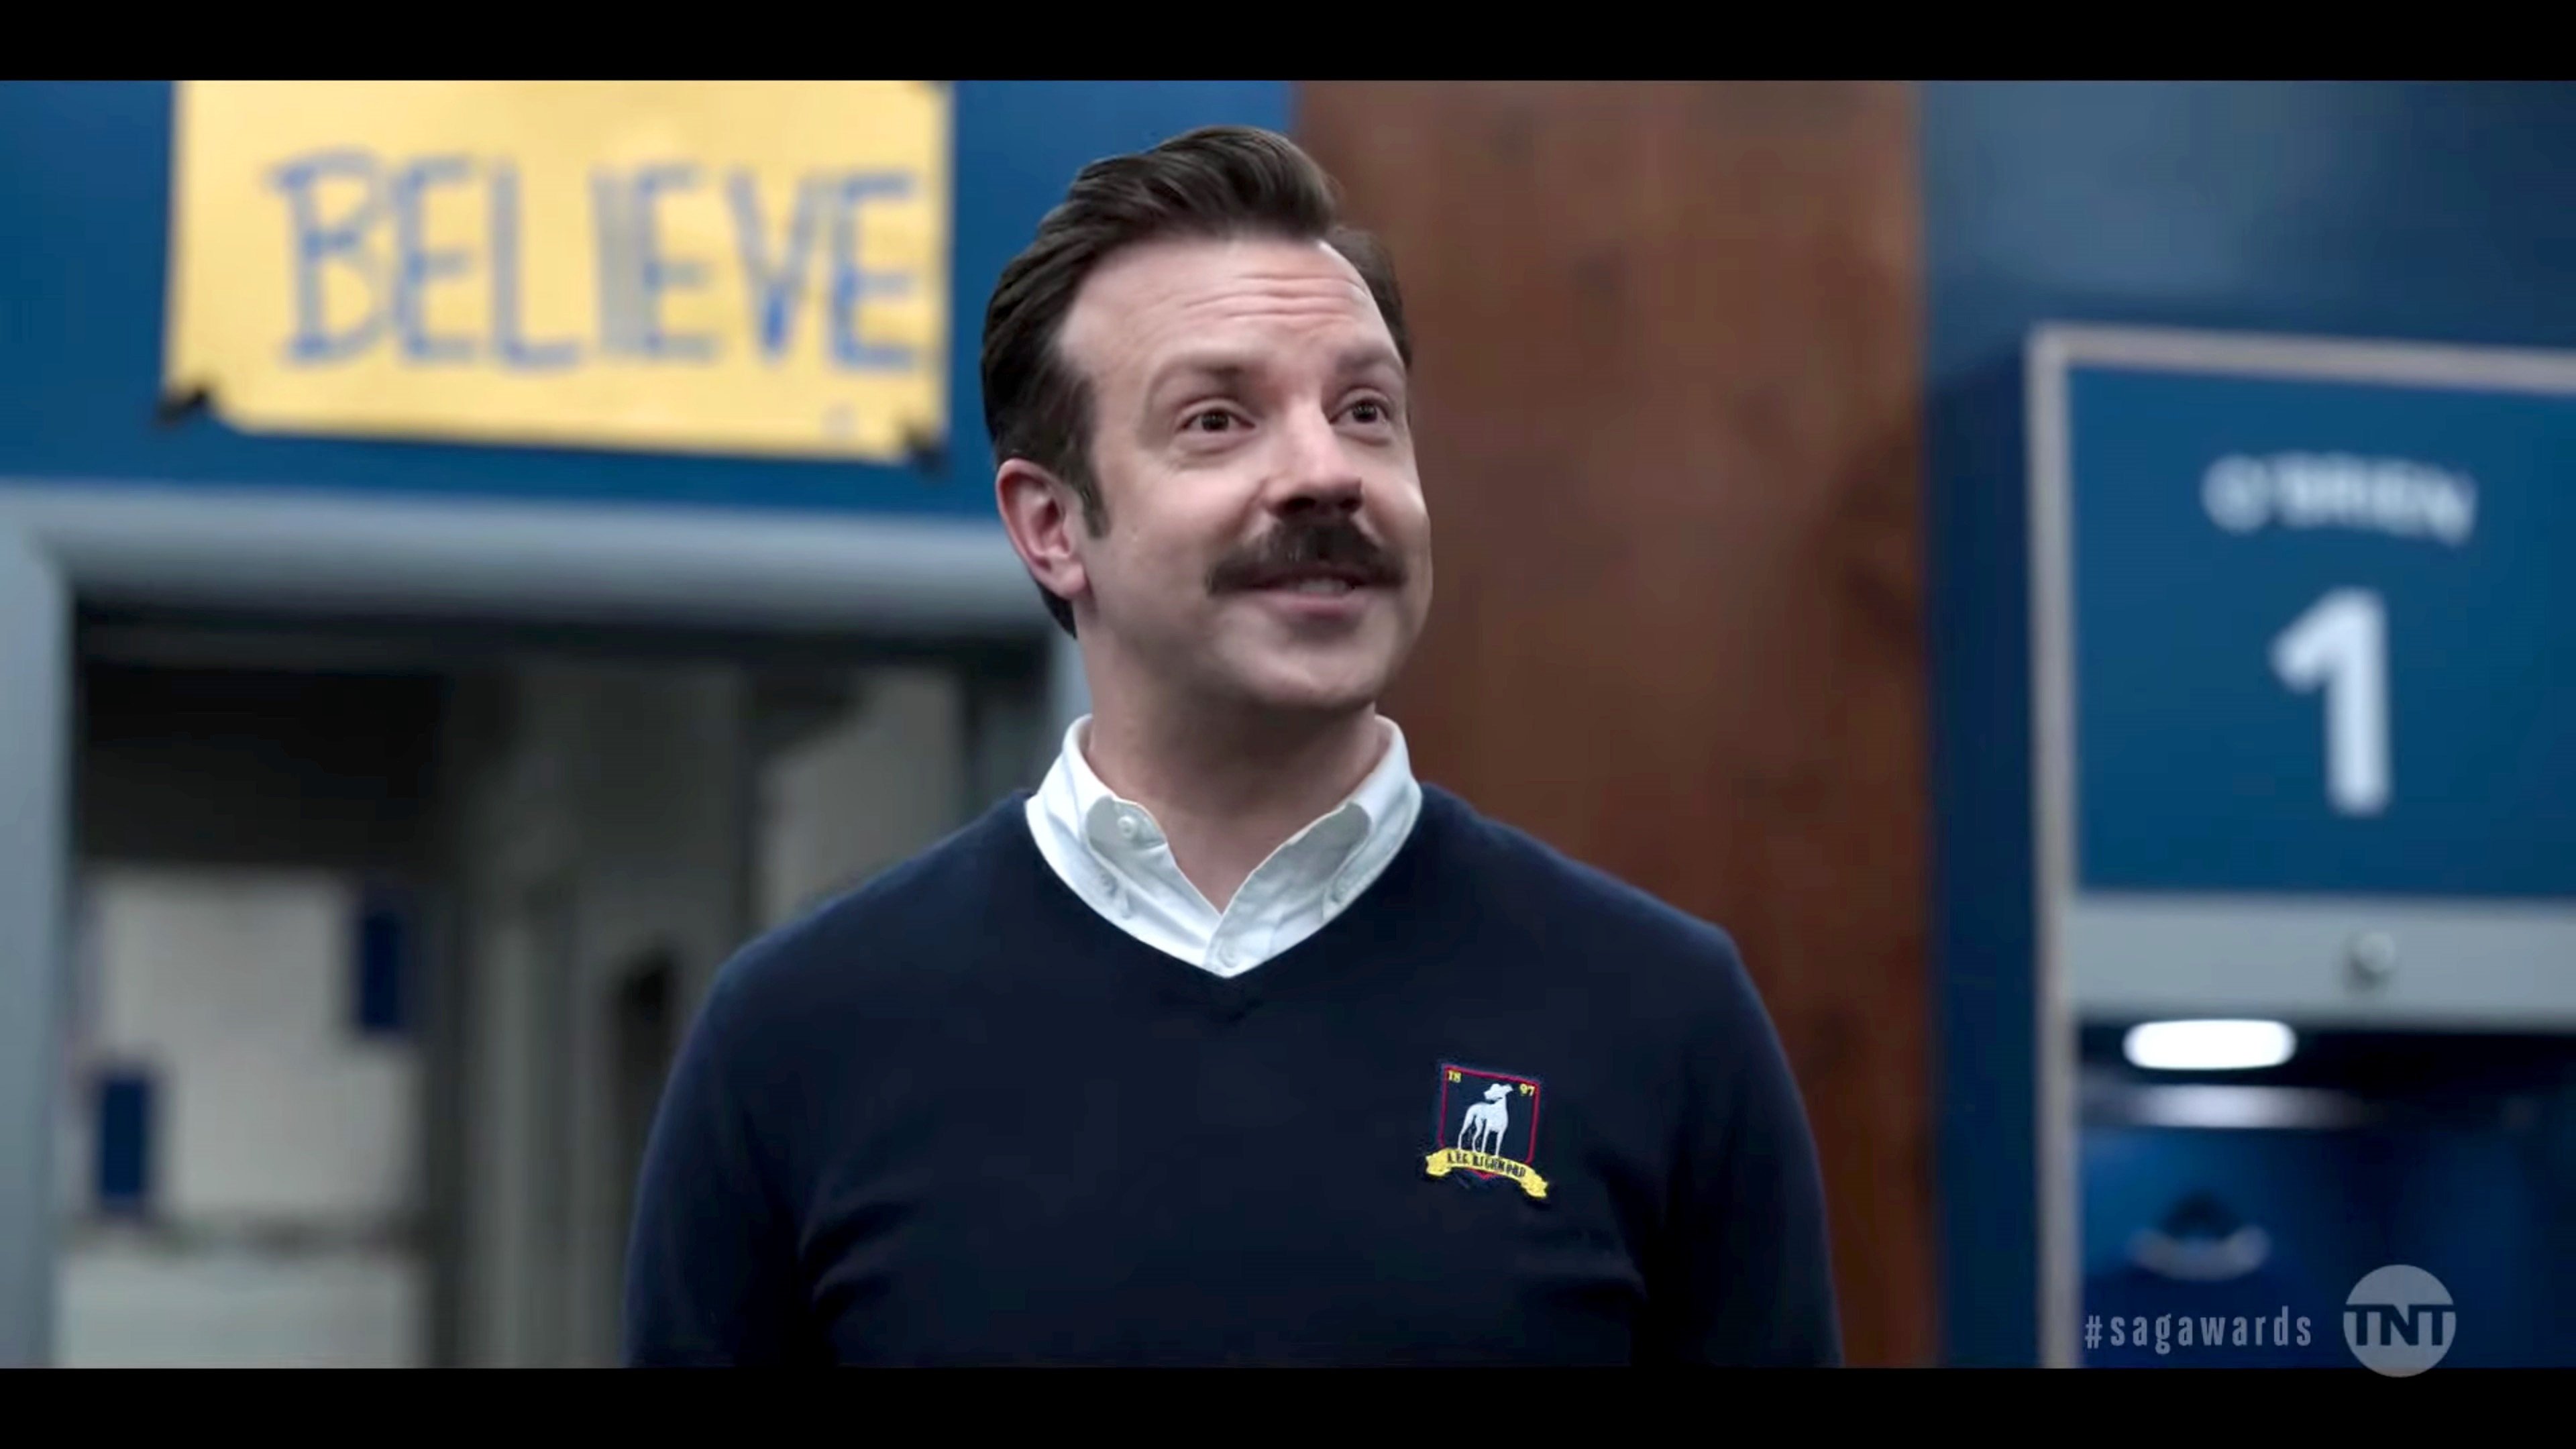 Jason Sudeikis as Ted Lasso in the Apple TV+ 'Ted Lasso' series